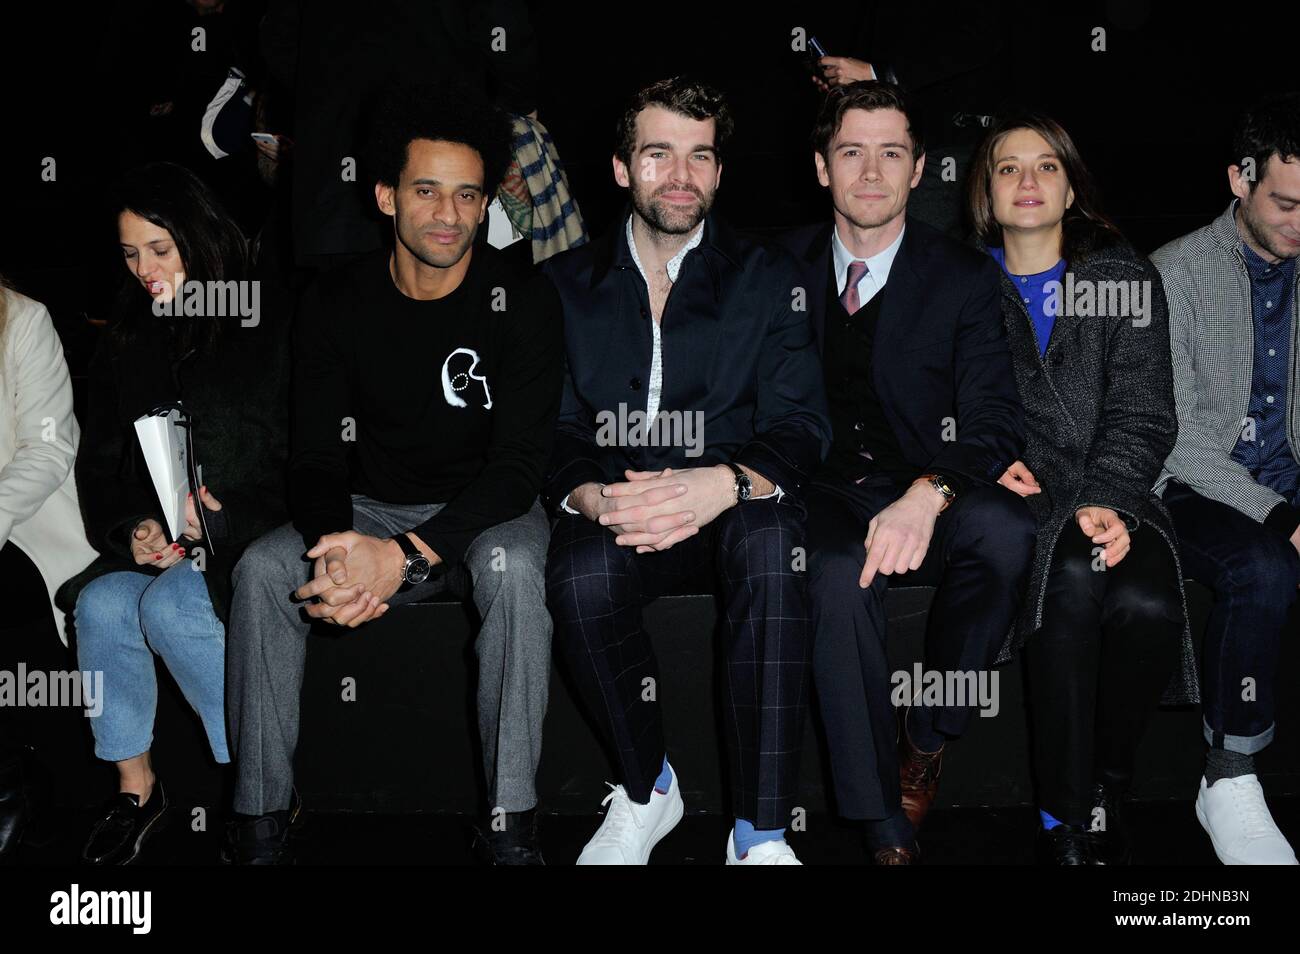 David Saada, Stanley Weber, Loic Corbery and Georgia Scalliet attend the Agnes B Menswear Spring-Summer 2016 show as part of Paris Fashion Week on January 24, 2016 in Paris, France. Photo by Alban Wyters/ABACAPRESS.COM Stock Photo